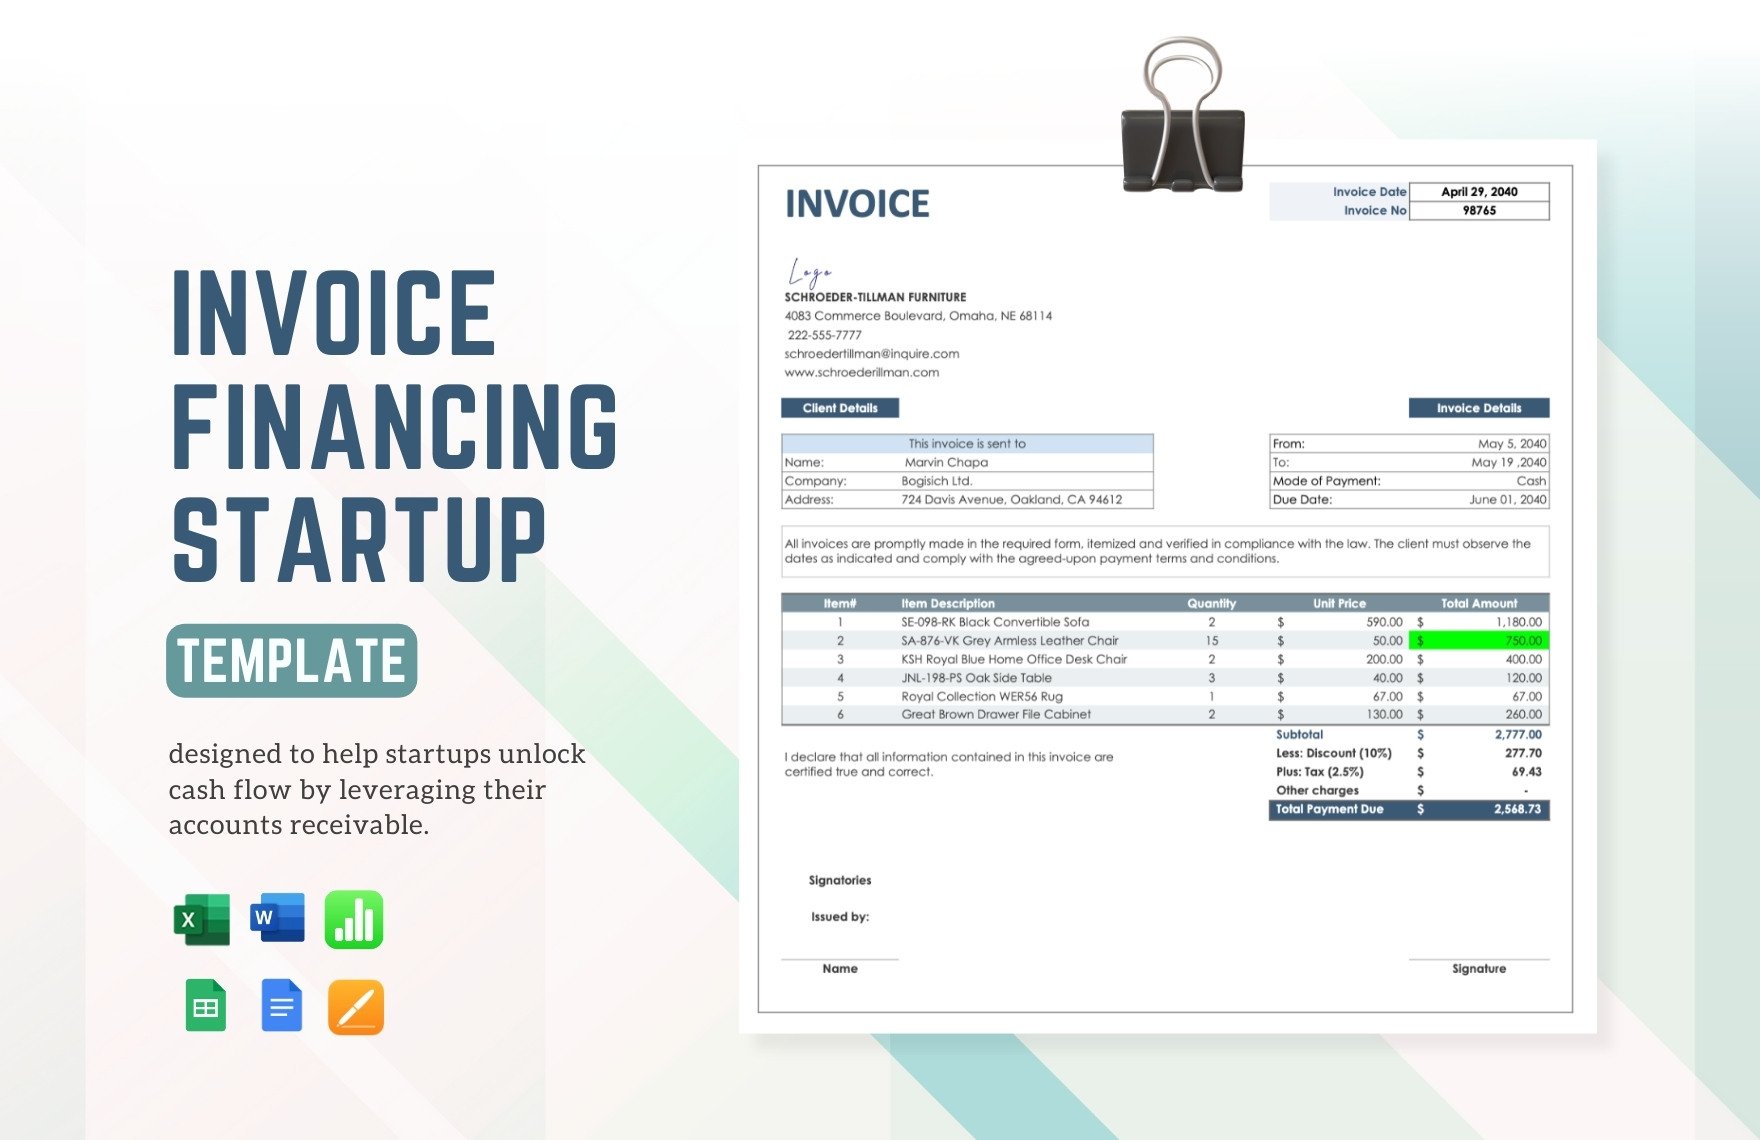 Invoice Financing Startup Template